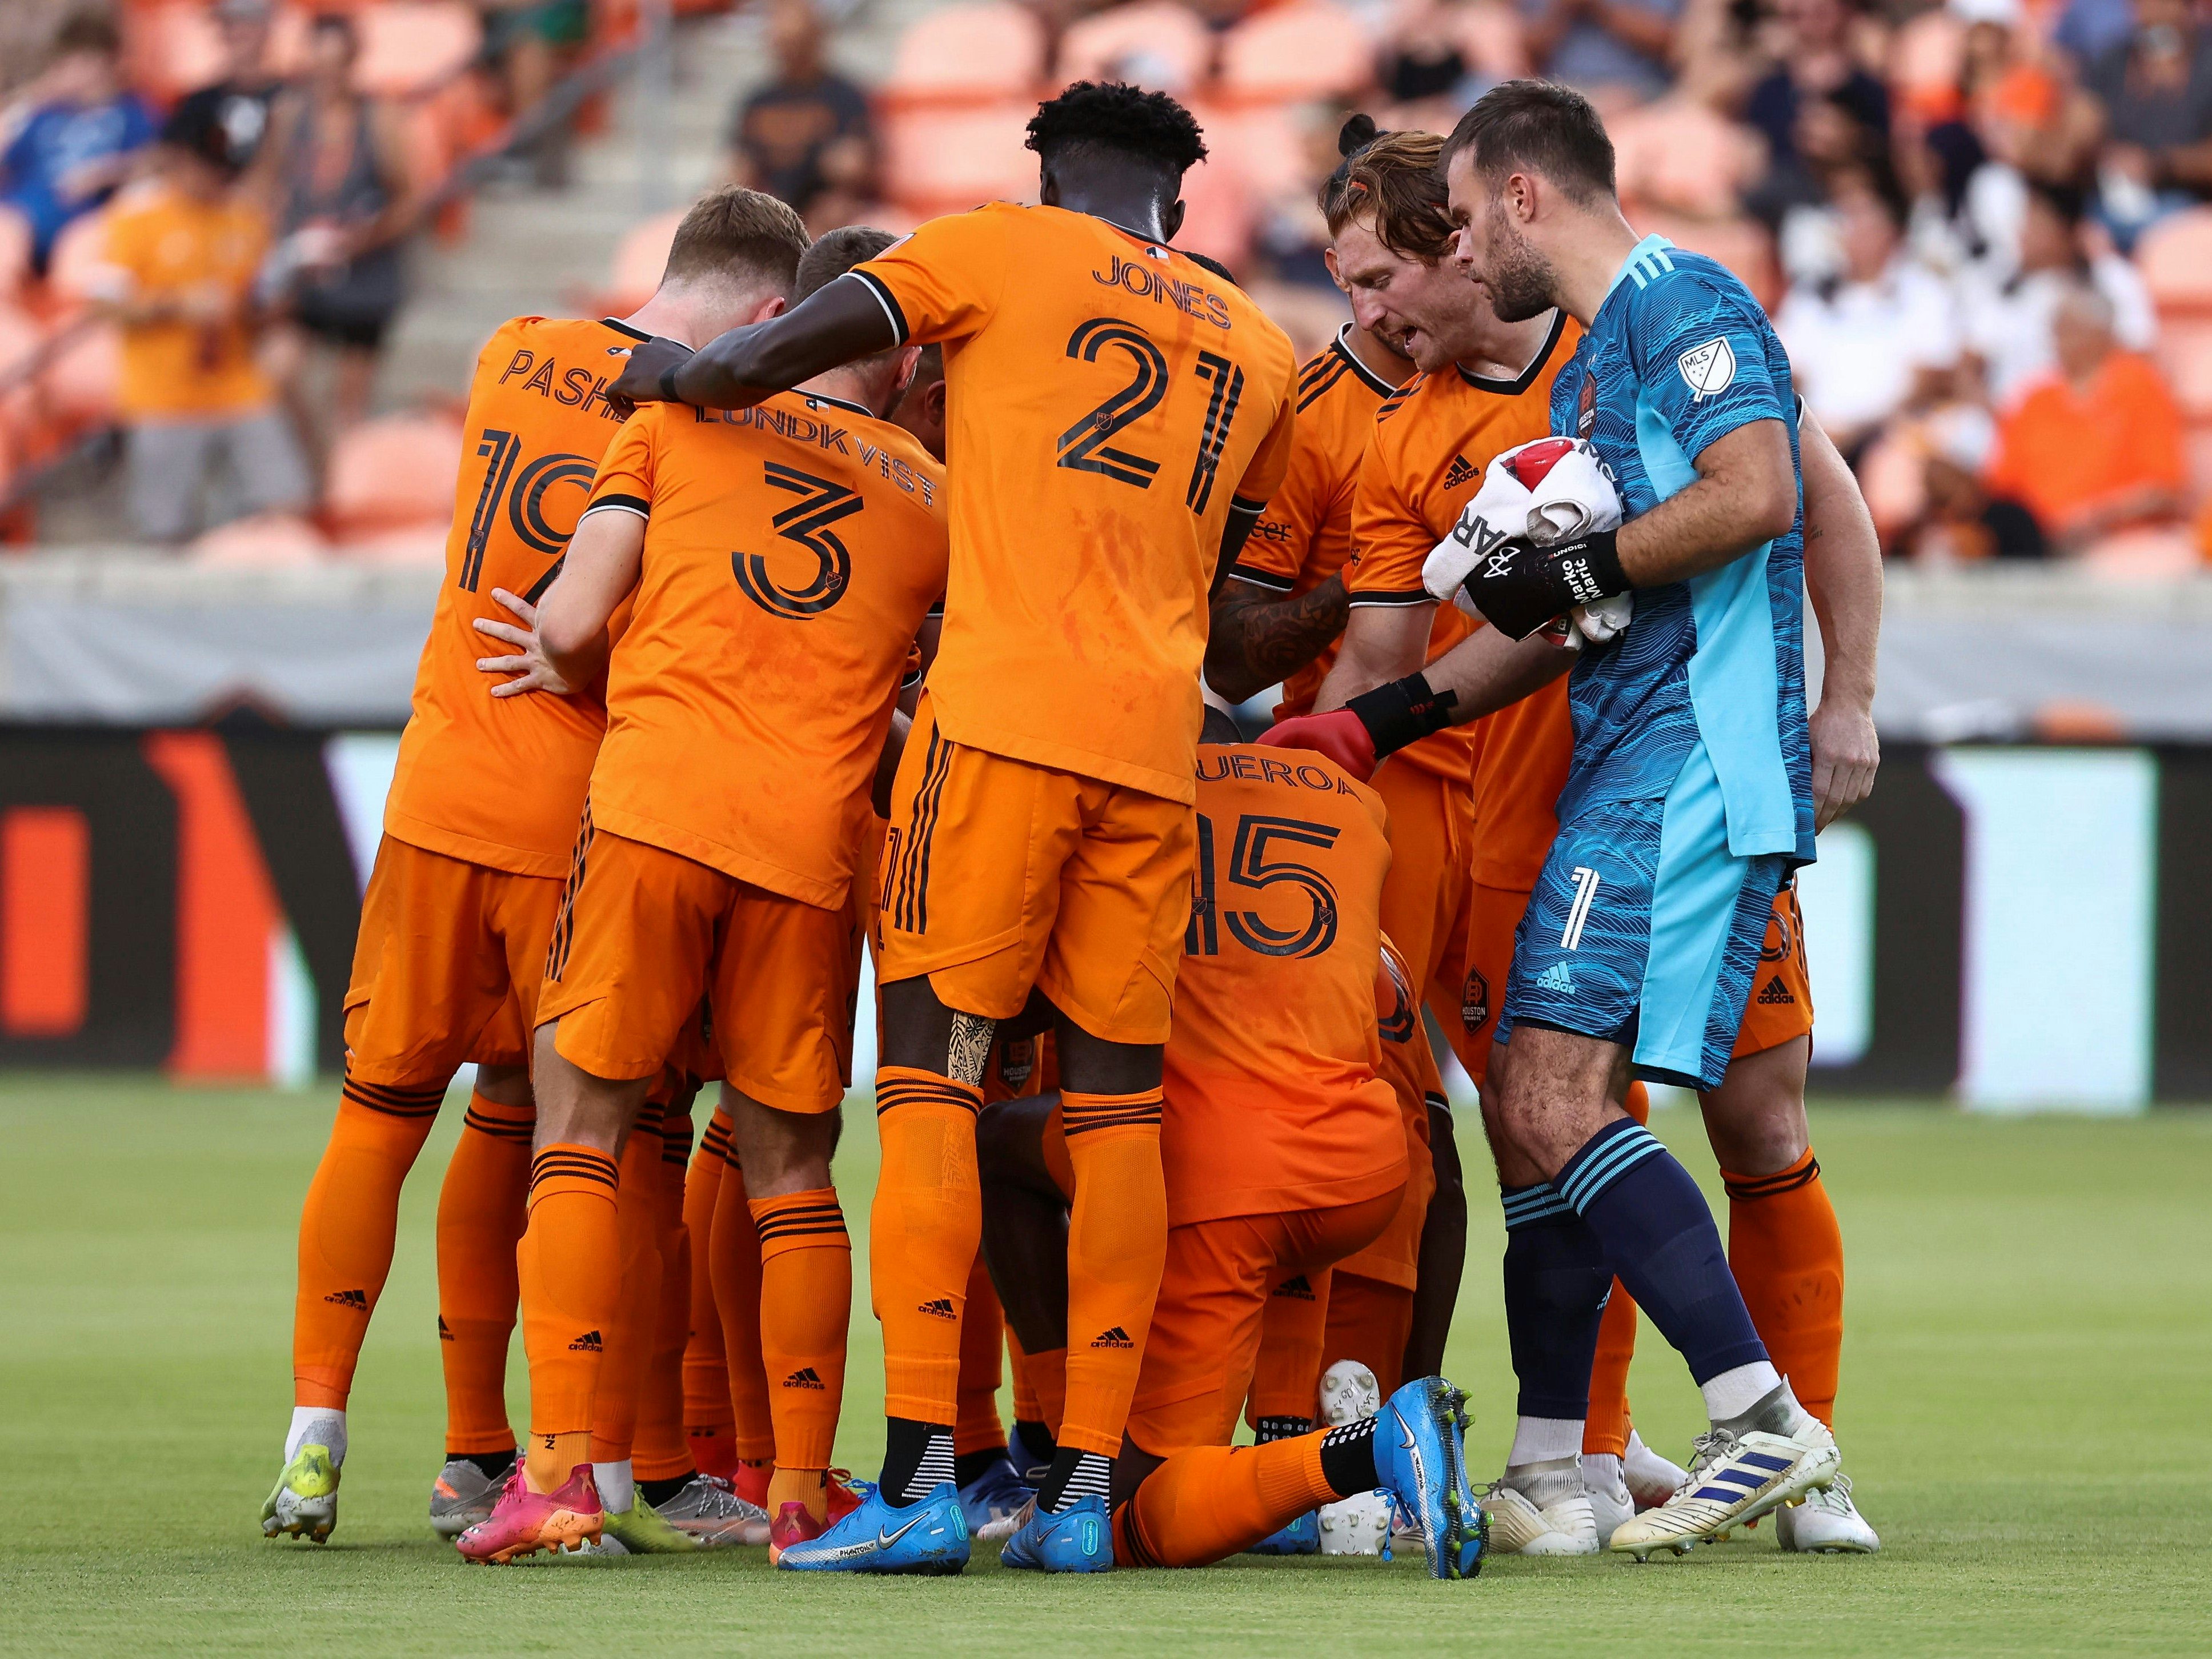 Houston Dynamo FC starting players huddle before the start of the match on June 24, 2021